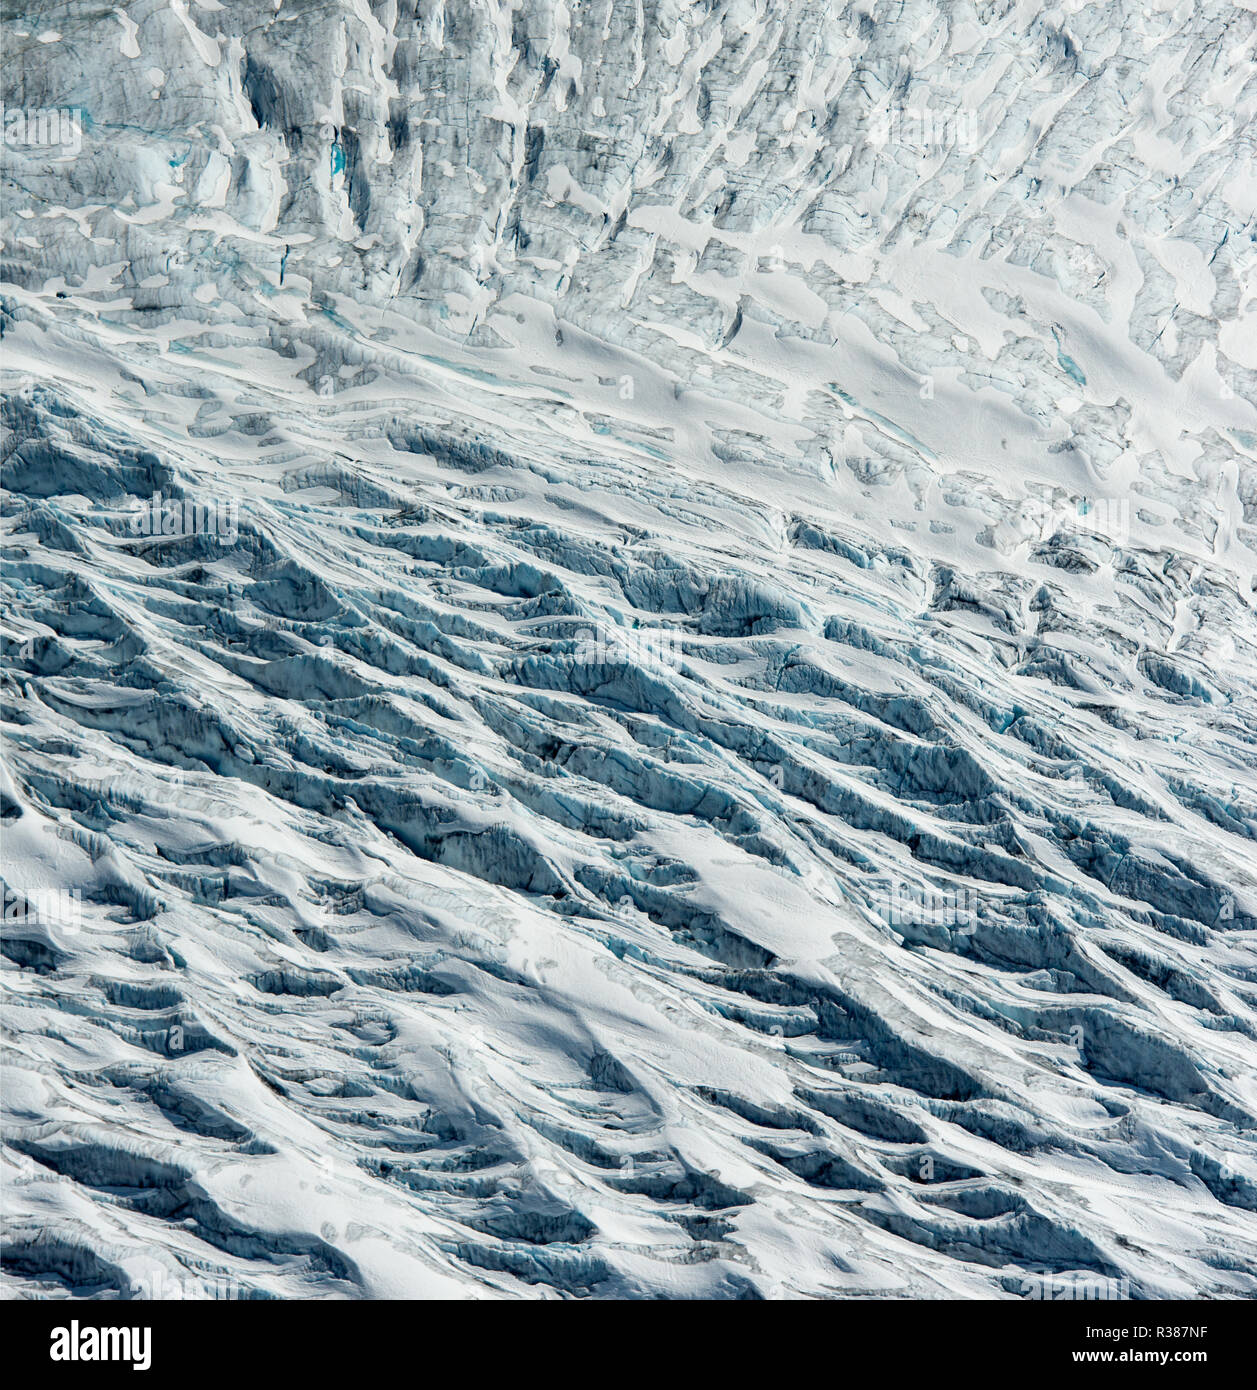 Amazing aerial detail of the Tunsbergdalsbreen glacier, showing the debris and moraine streams going down the glacier.  Tunsbergdalsbreen is a glacier Stock Photo